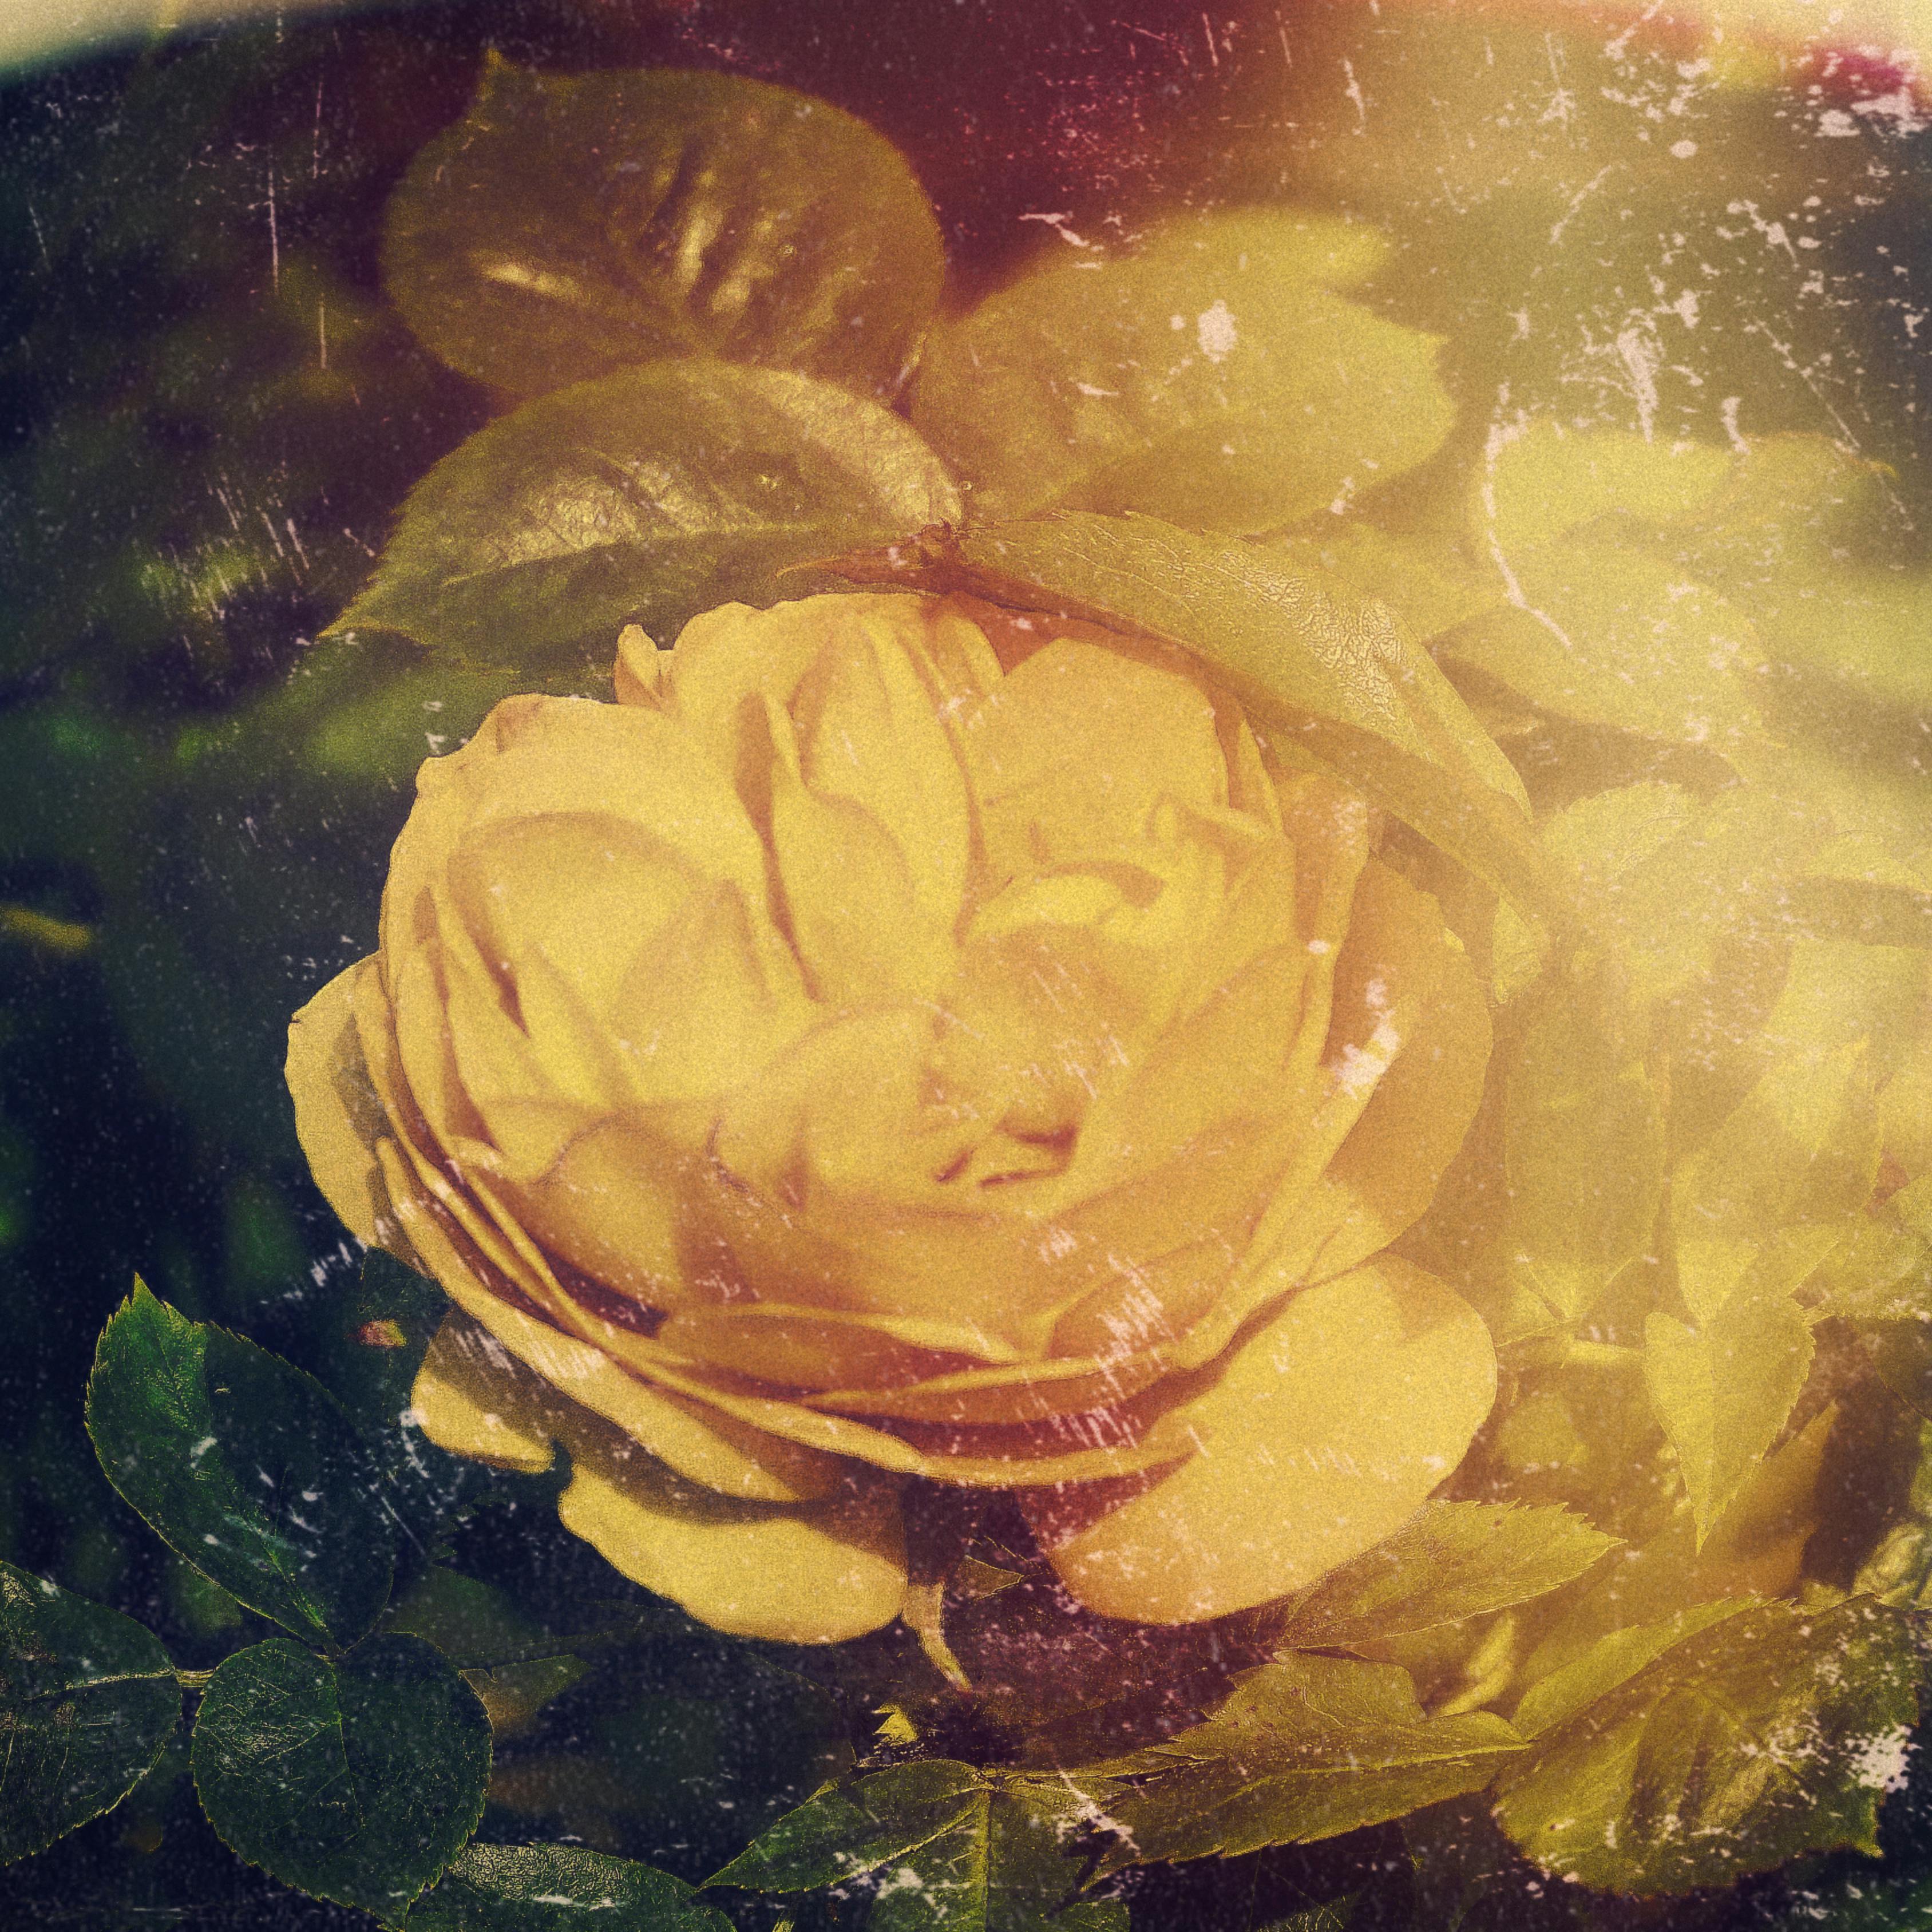 An old photo of a blooming yellow rose.